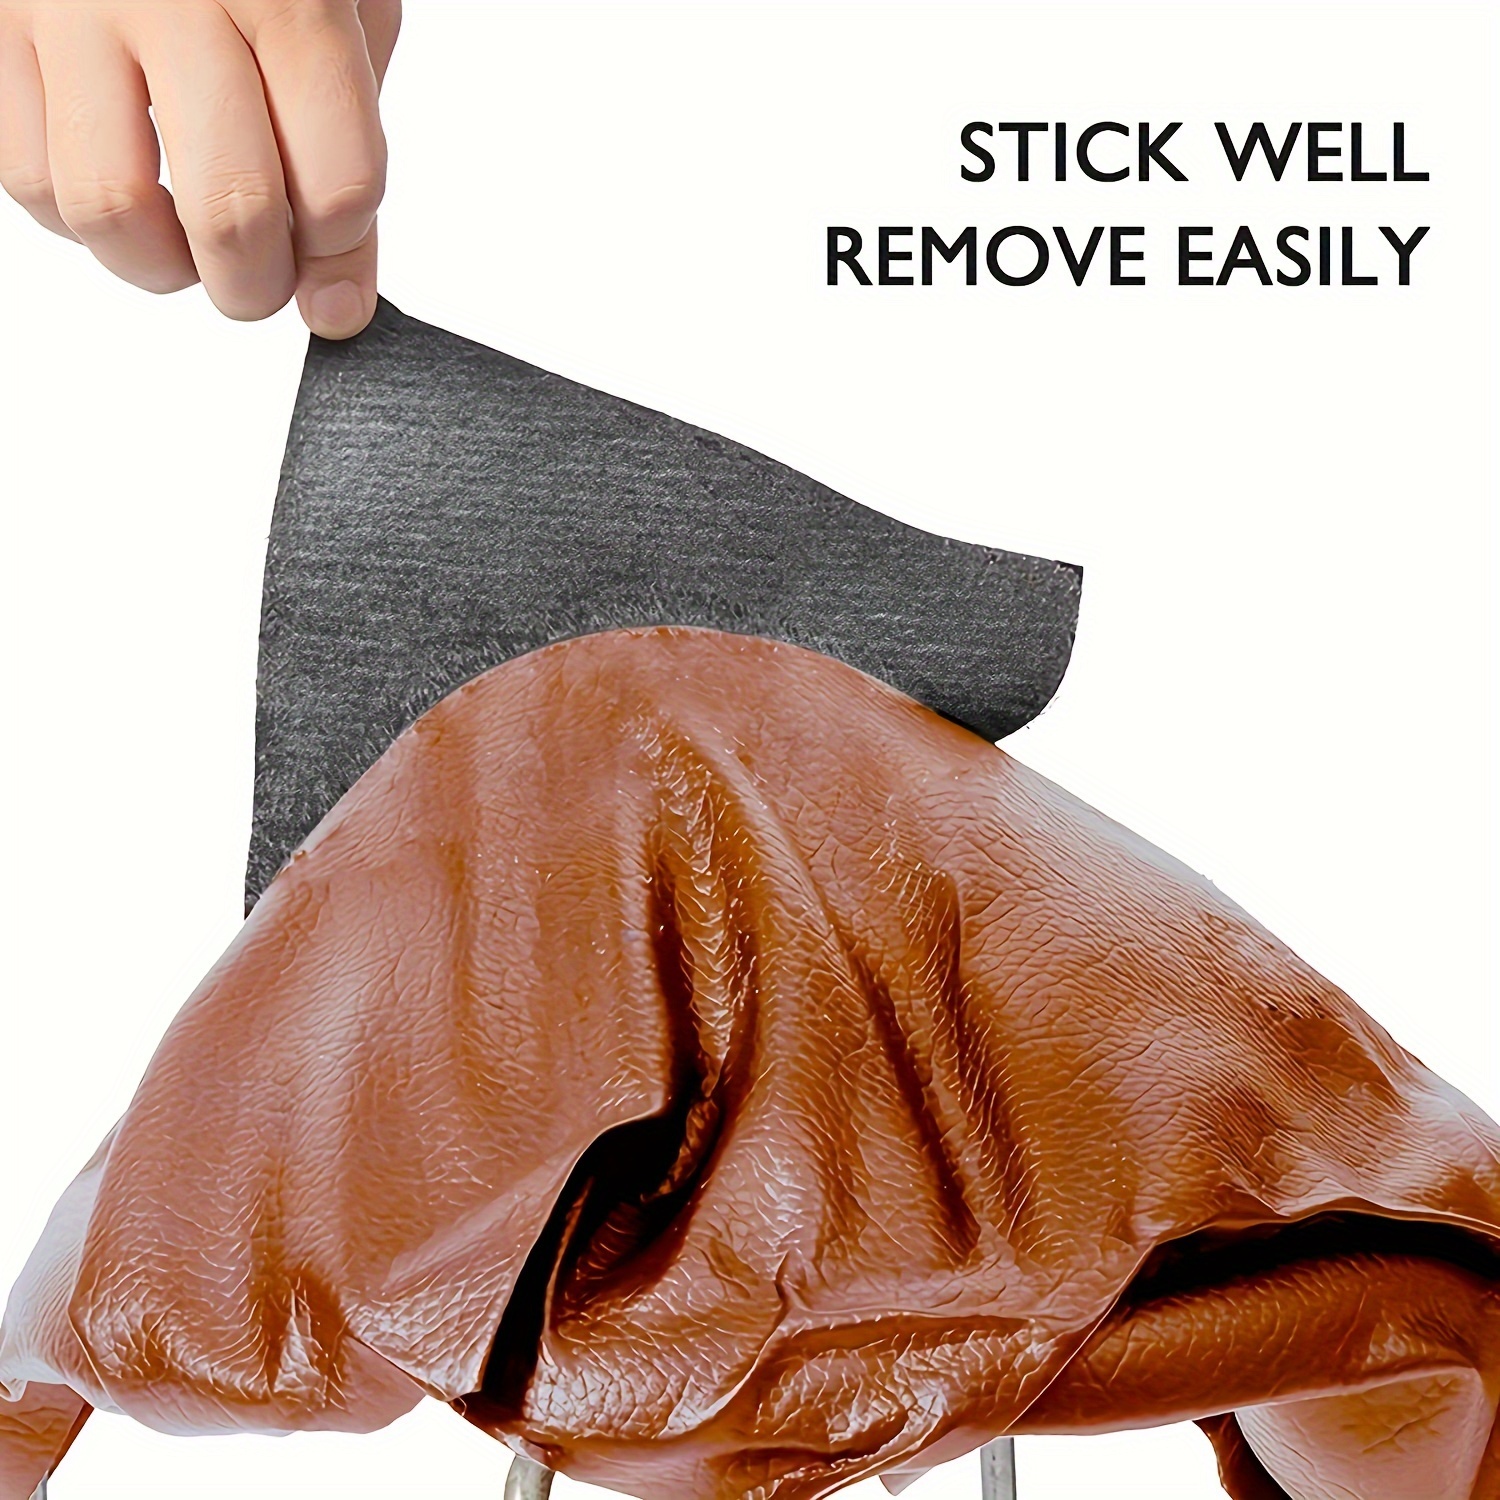 Oily Leather Repair Patch self adhesive Artificial Leather - Temu